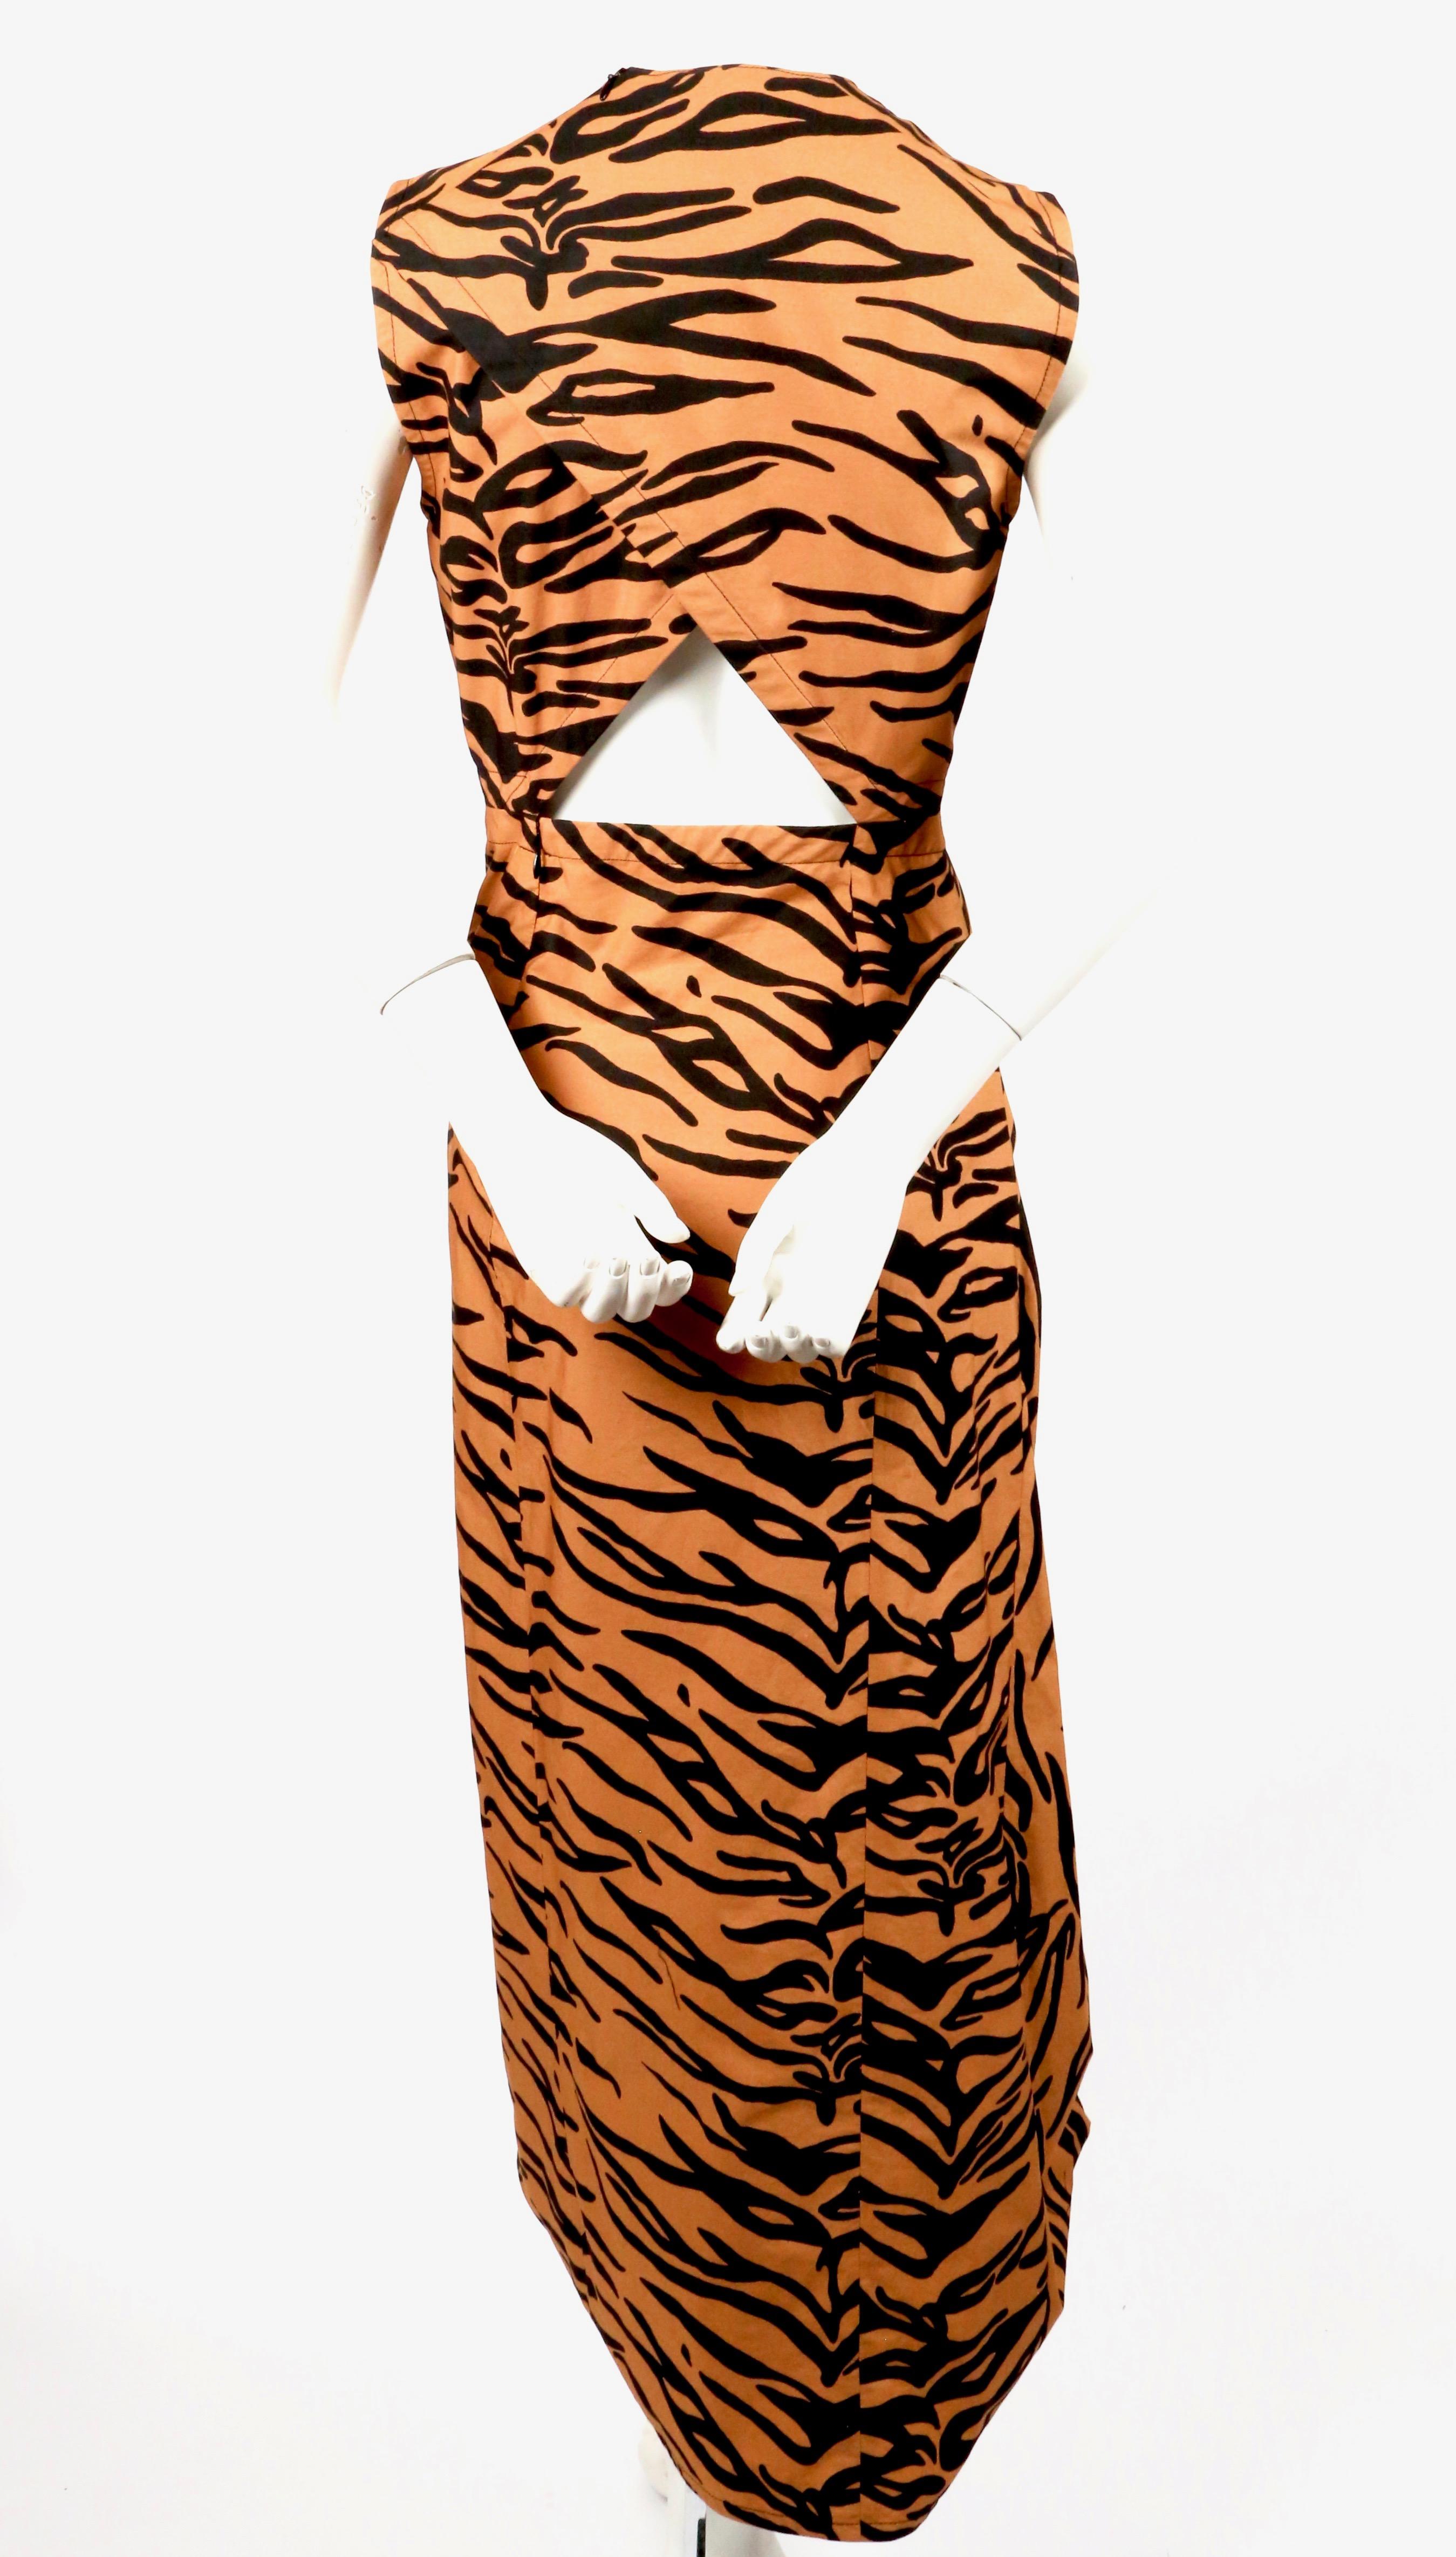 Orange CELINE by PHOEBE PHILO tiger print draped dress with open back - new